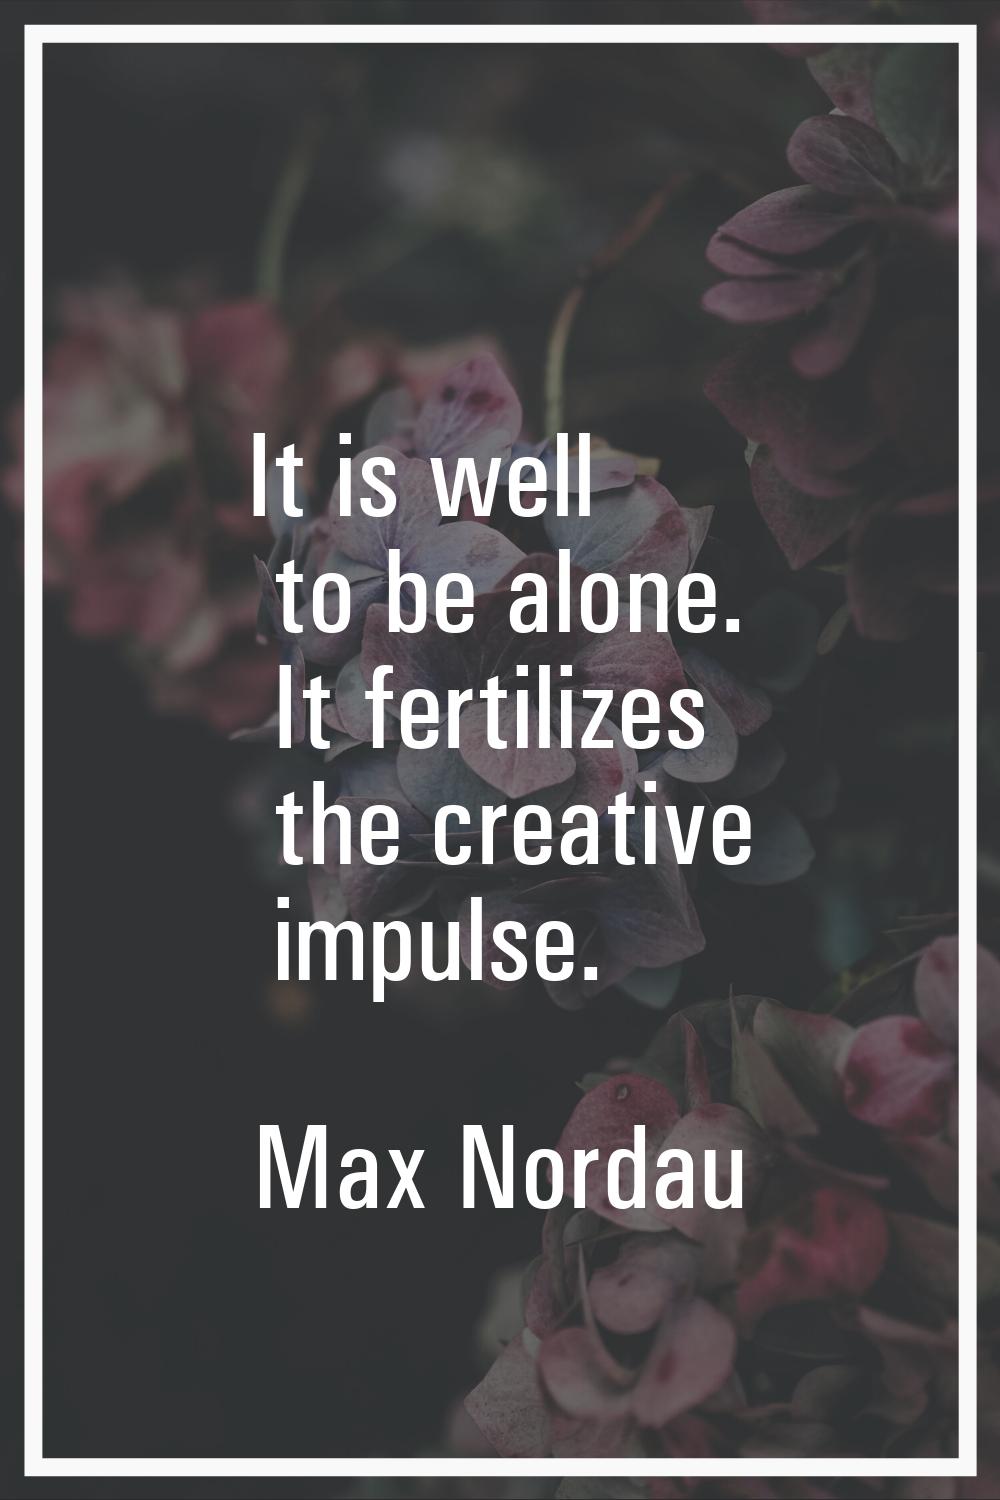 It is well to be alone. It fertilizes the creative impulse.